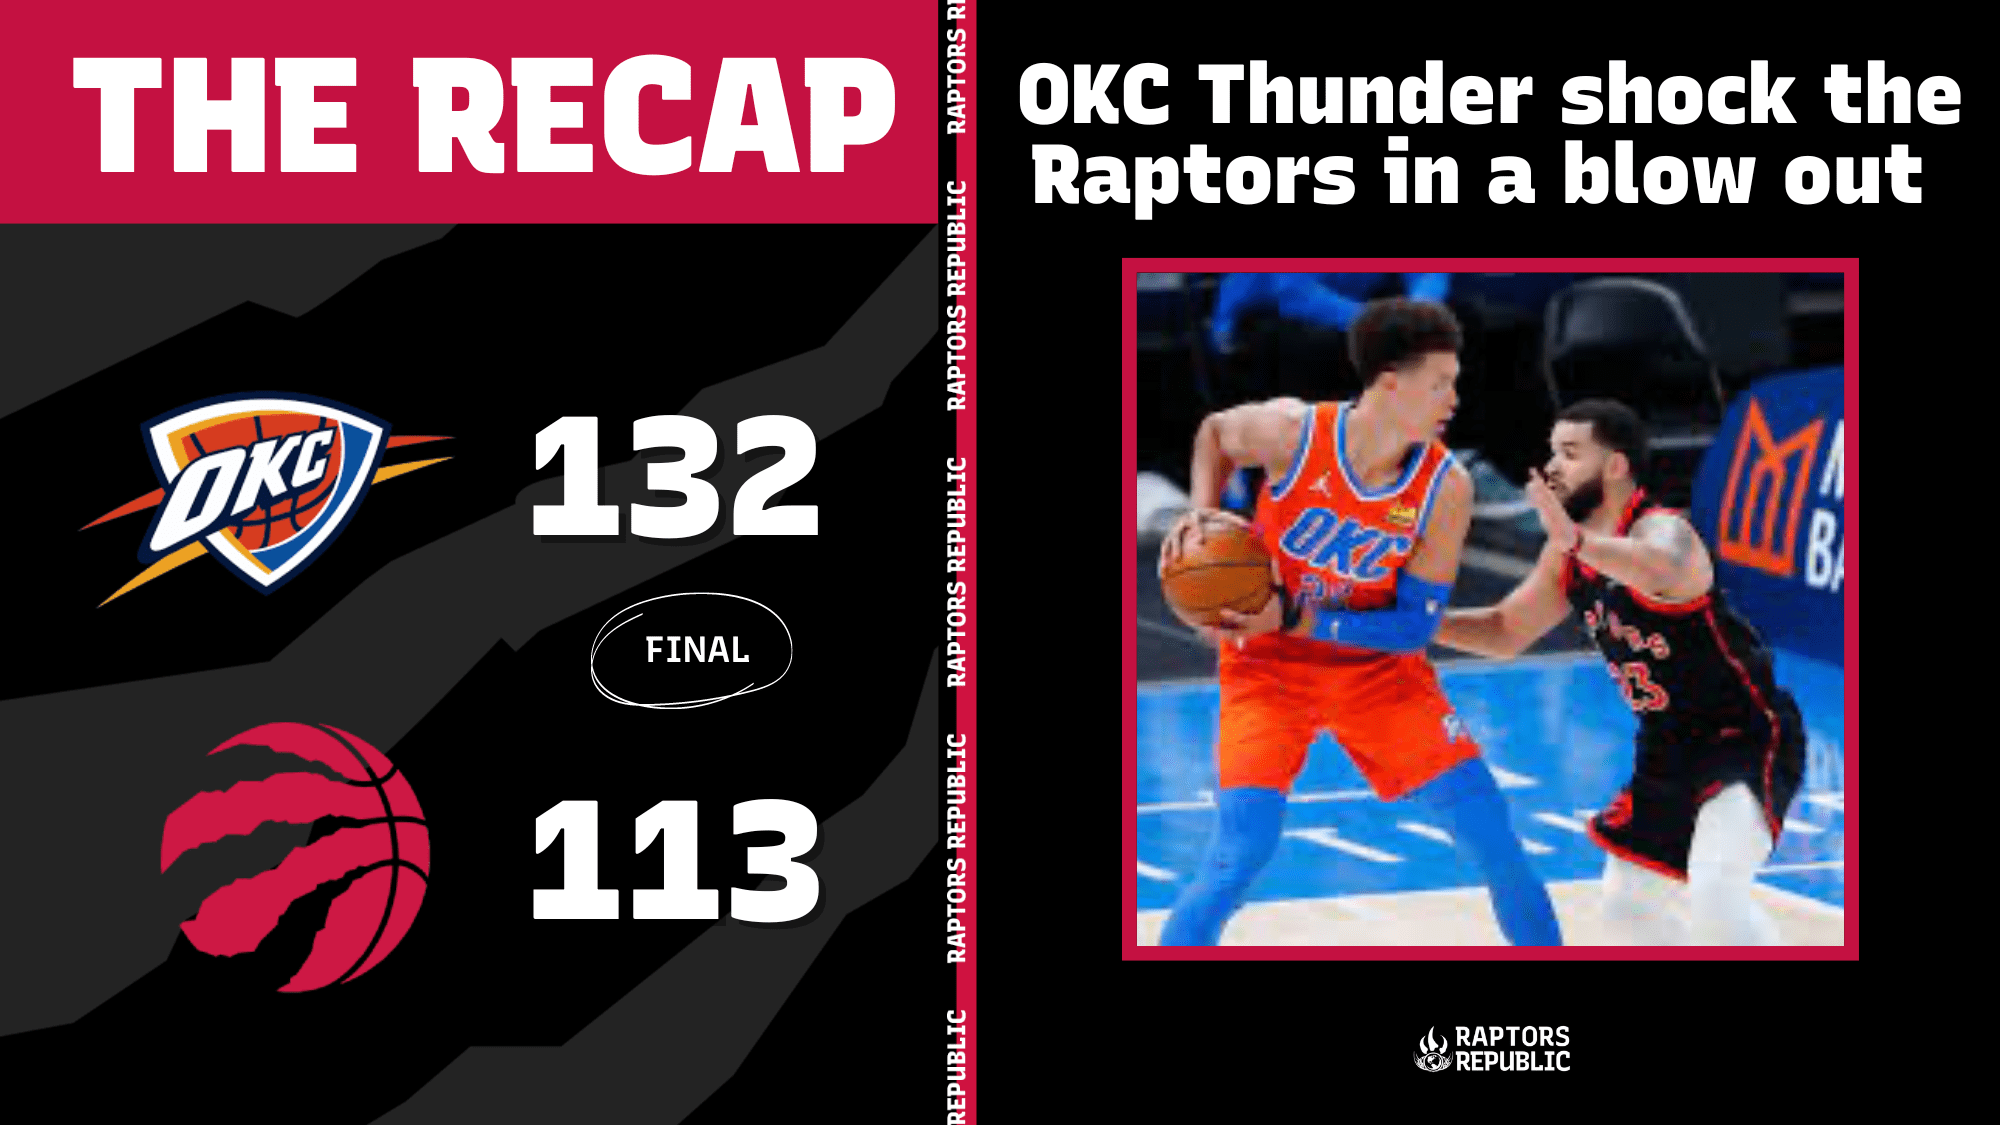 Thunder shocks the Raptors in a blowout loss.